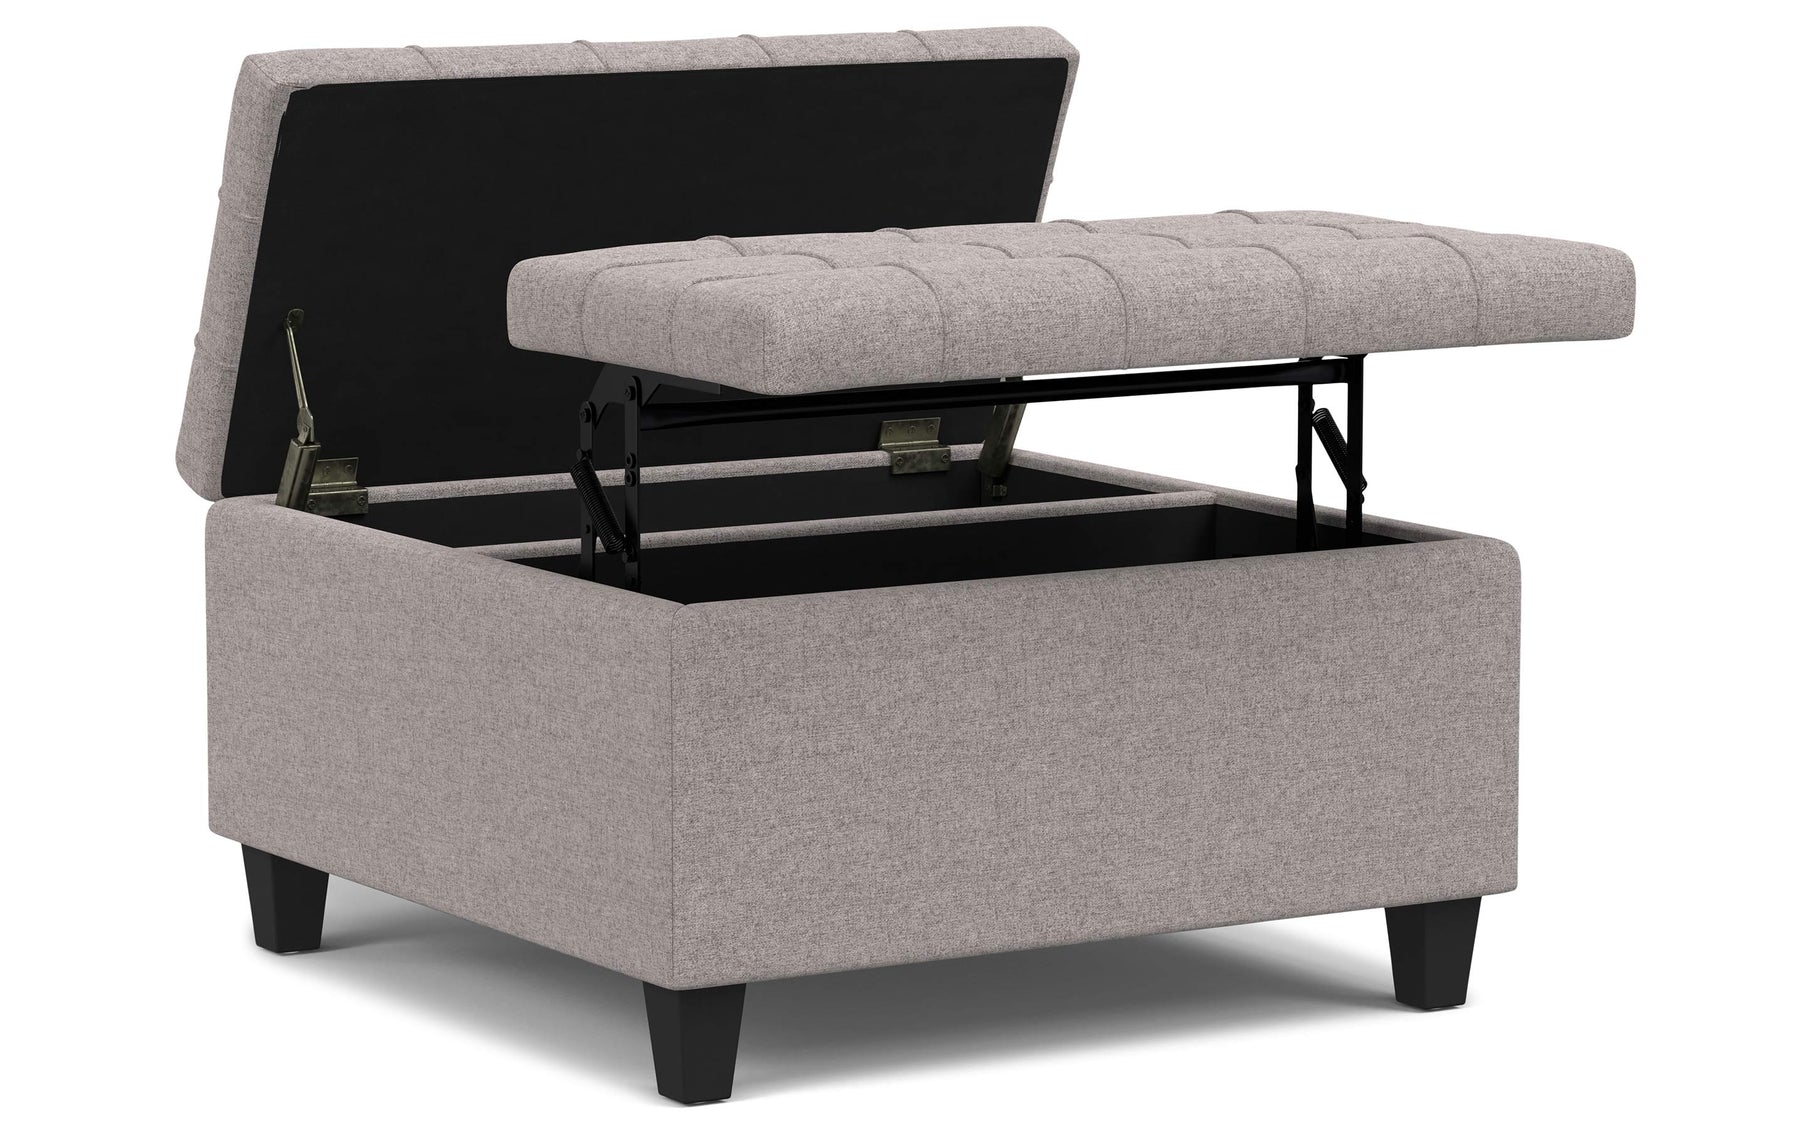 Cloud Grey Linen Style Fabric | Harrison Small Square Coffee Table Storage Ottoman